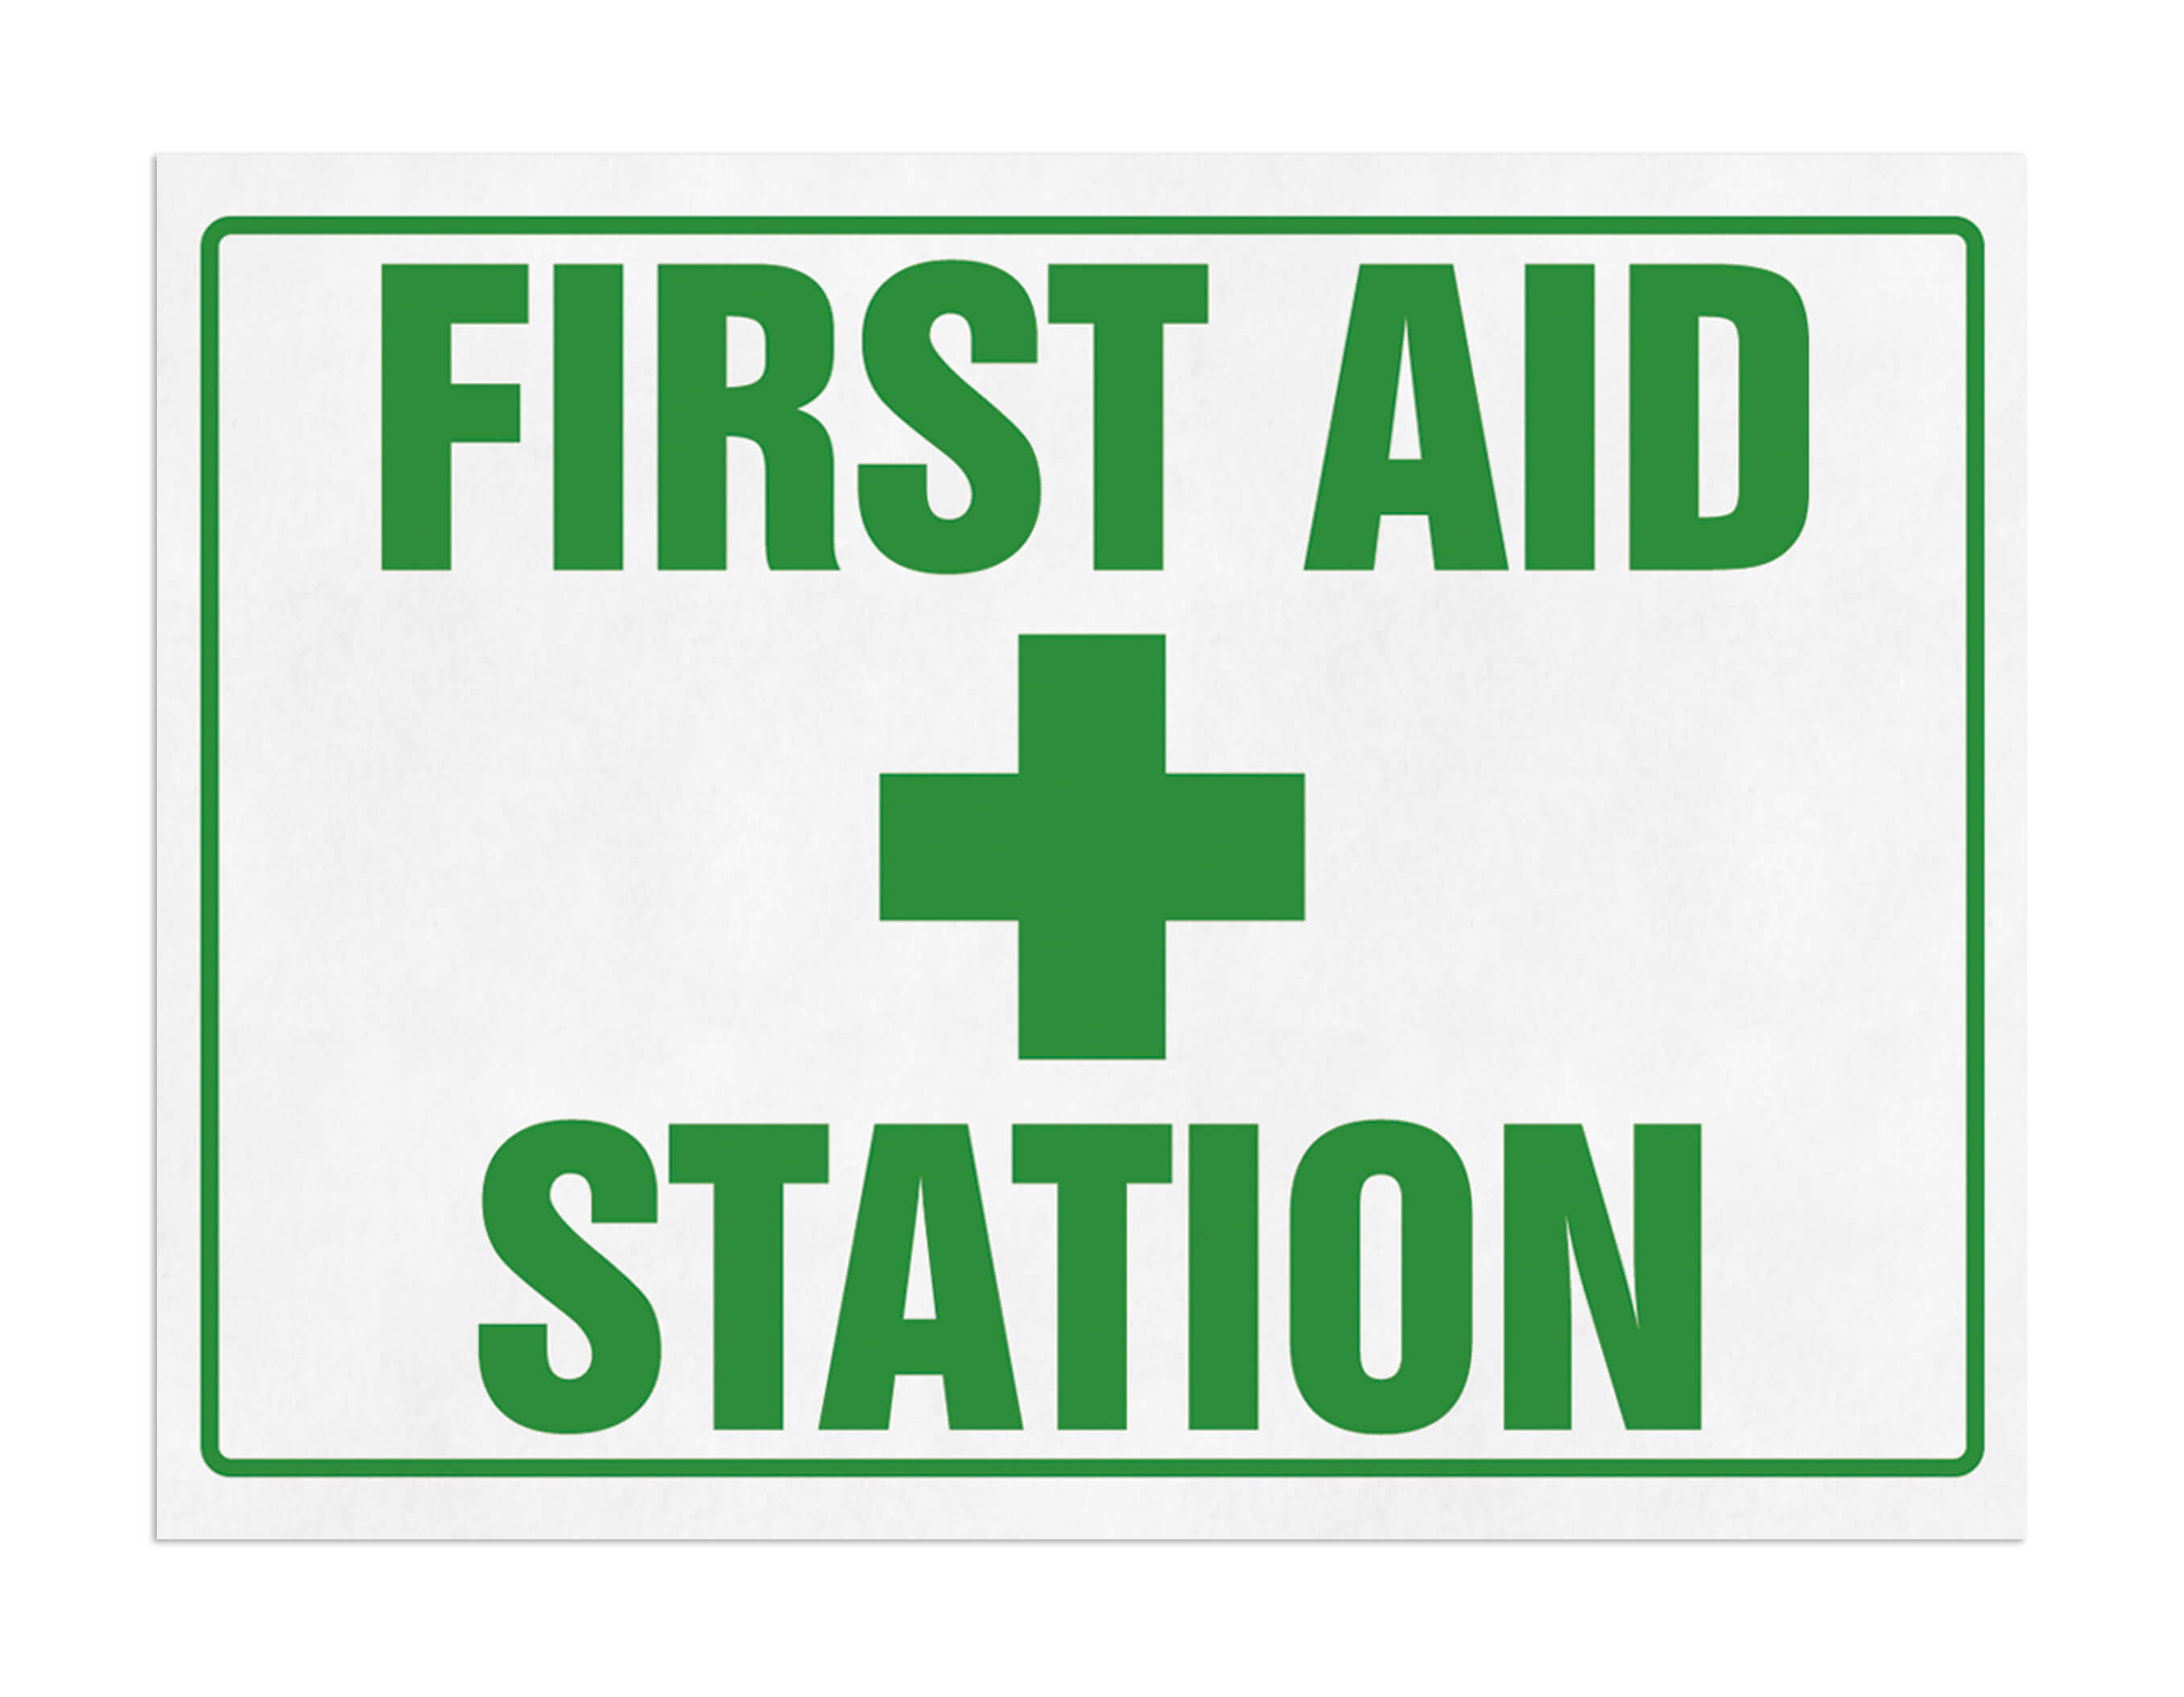 FIRST AID STATION SIGN - ENGLISH